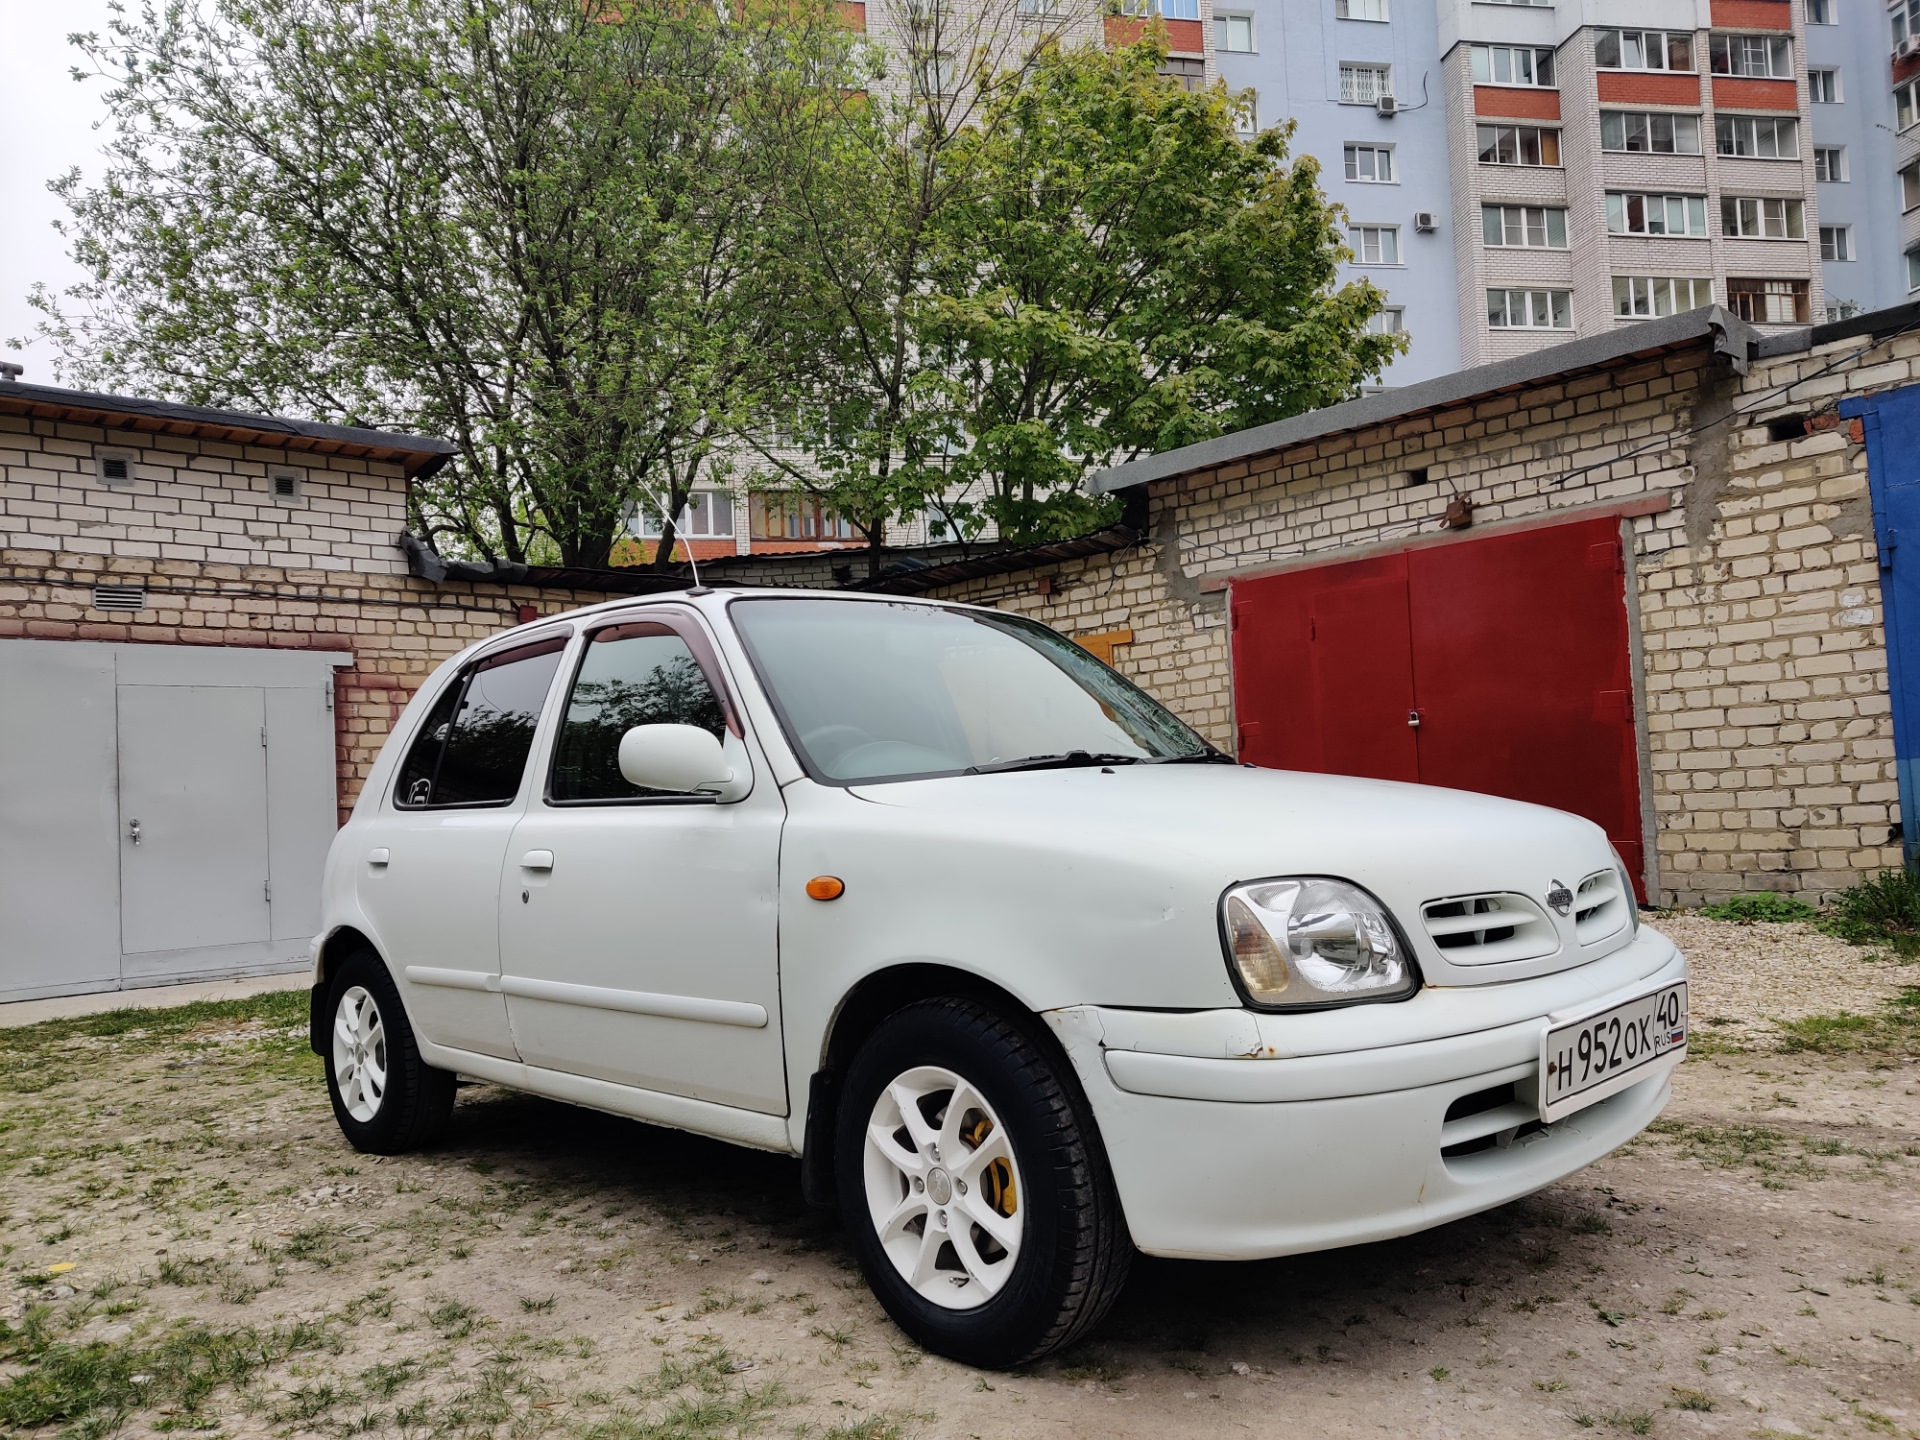 Nissan March II (k11). Марч 2001 года. Ниссан белый 2001 года. Ниссан Марч белый. March two